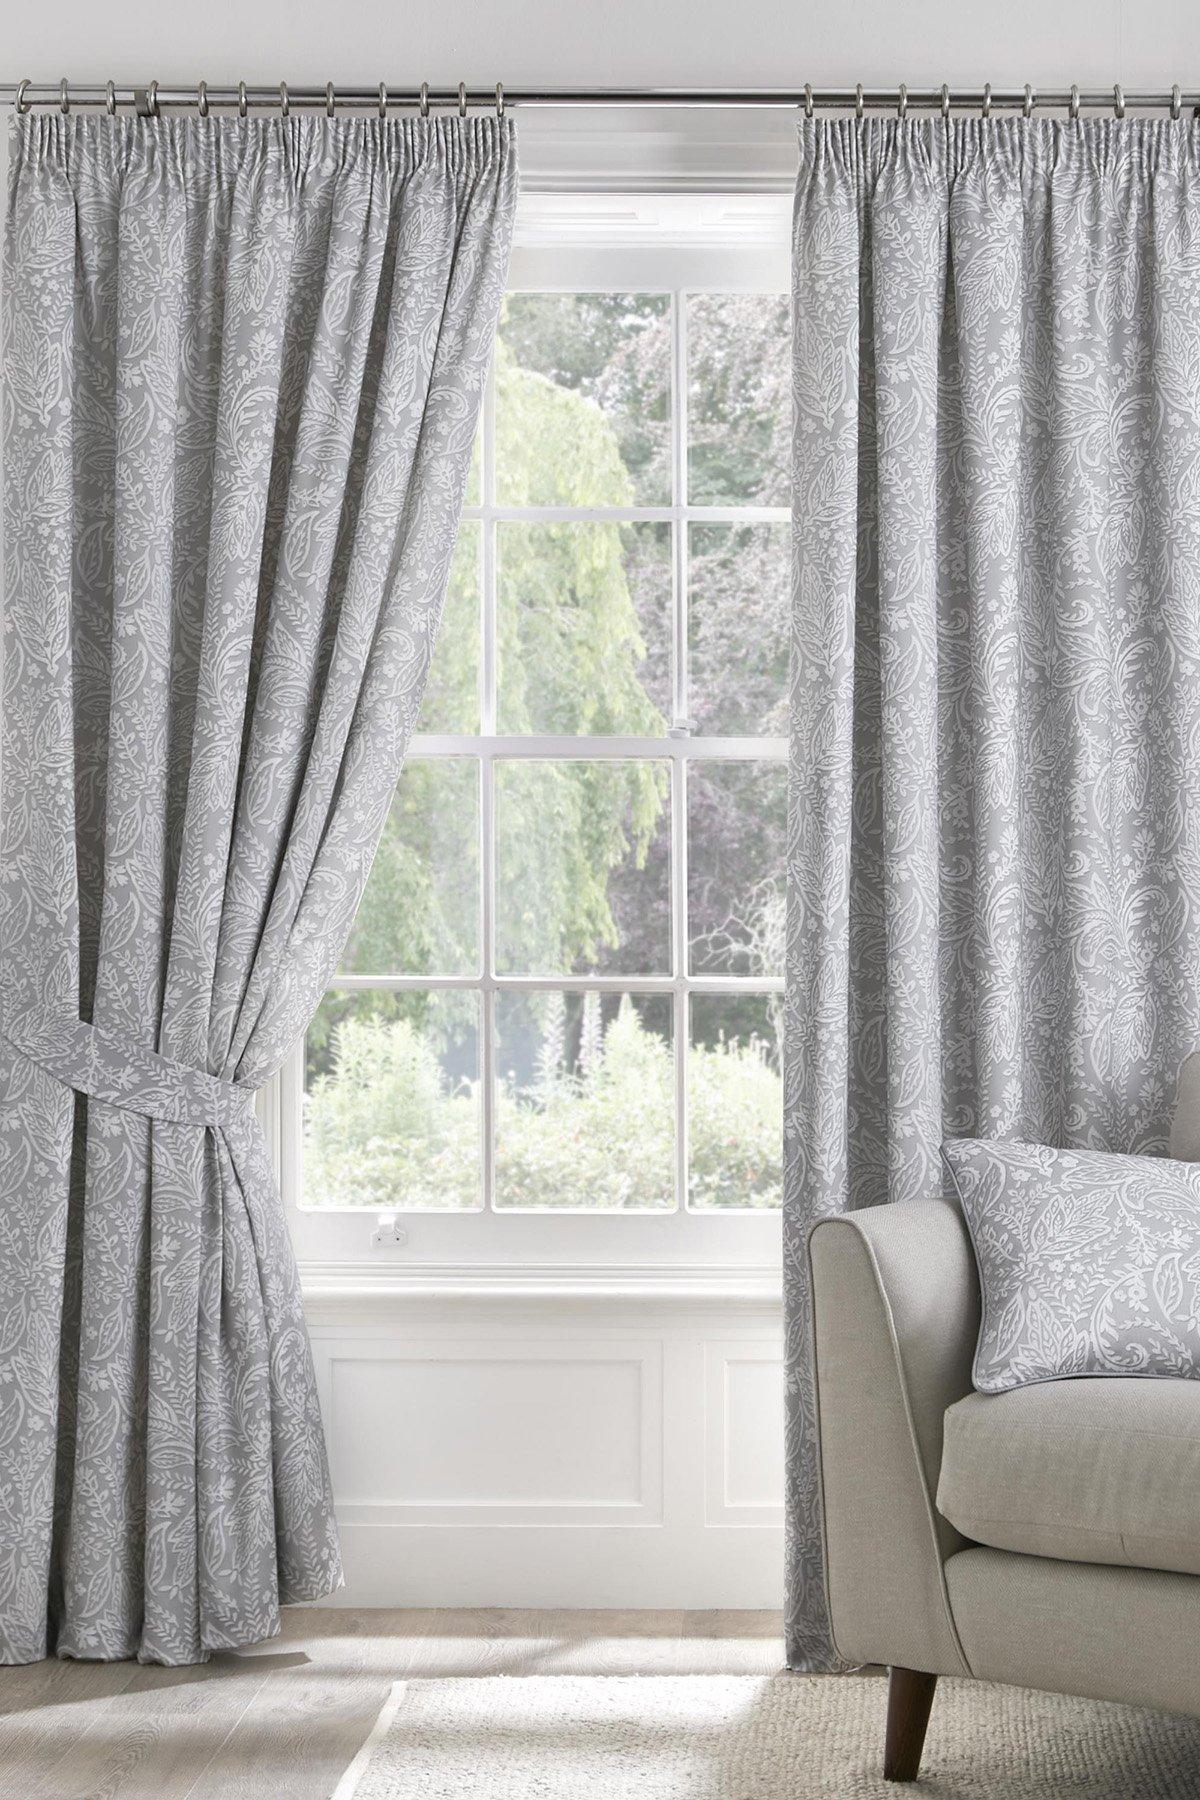 'Aveline' 100% Cotton Pair of Pencil Pleat Curtains With Tie-Backs